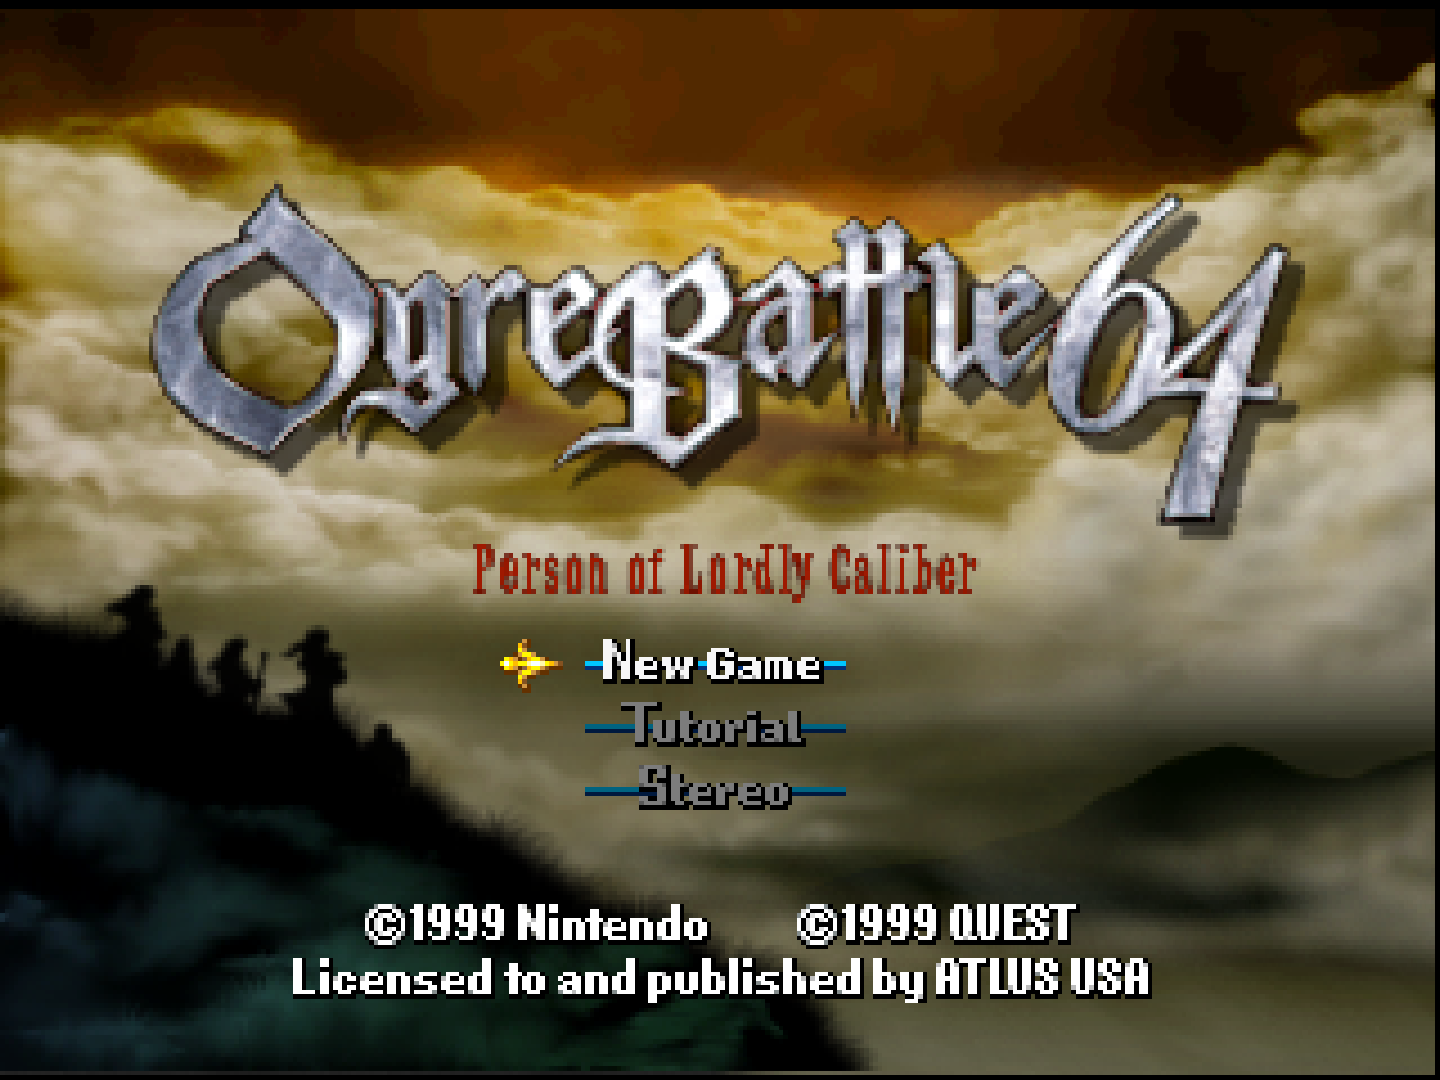 Ogre Battle 64 - person of Lordly Caliber Nintendo 64. 13. Ogre Battle 64: person of Lordly Caliber. Ogre Battle 64 - person of Lordly Caliber (USA). Ogre battle